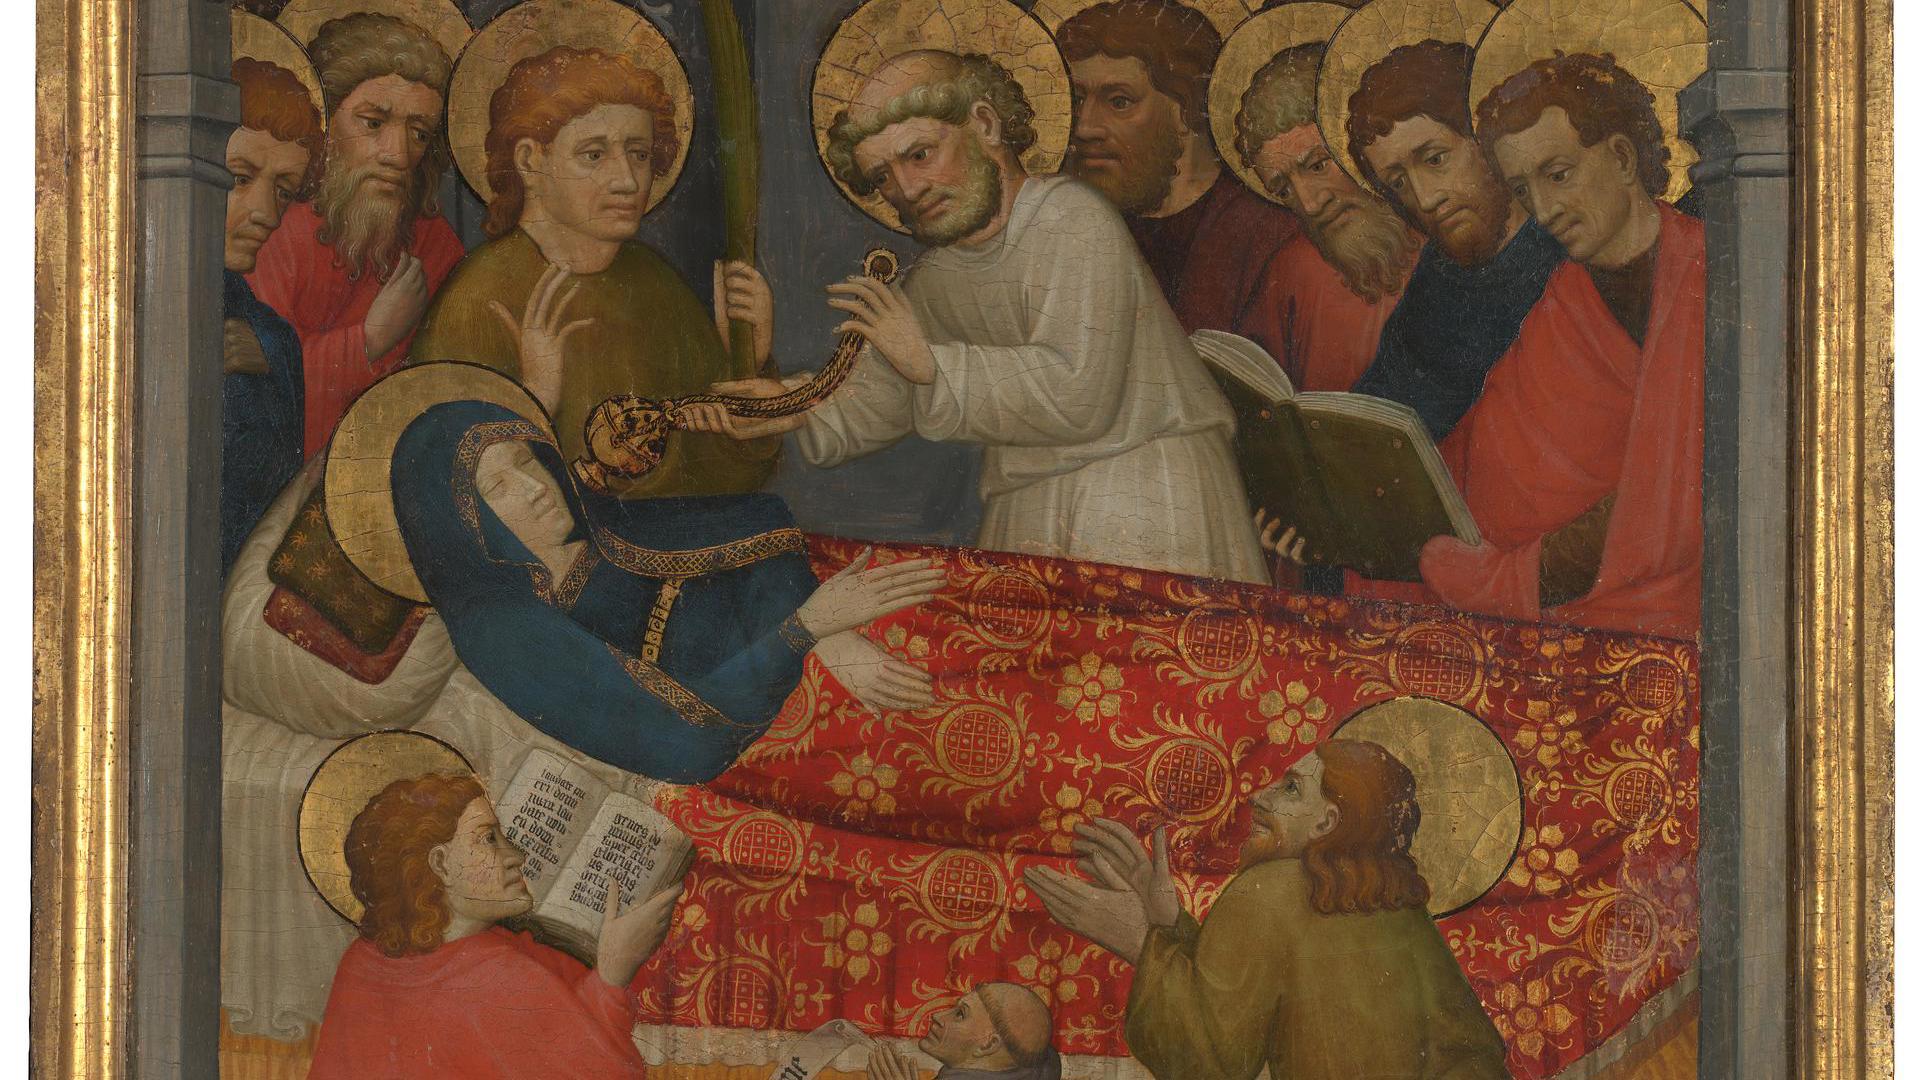 The Dormition of the Virgin by Tyrolese